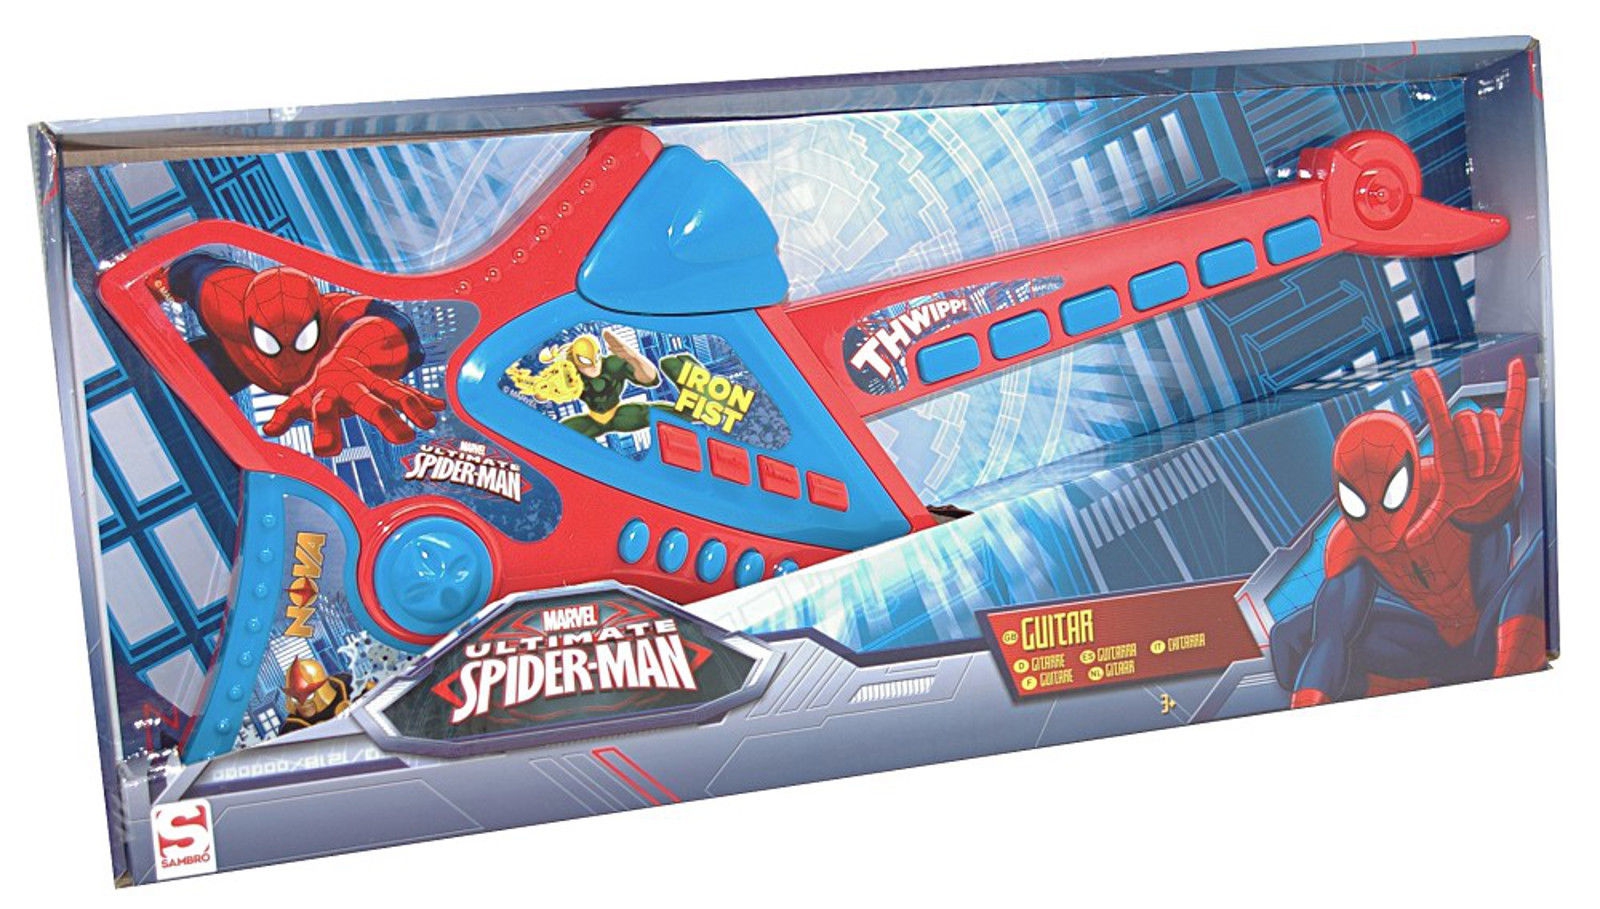 Spiderman Thwipp 'Musical' Guitar Toy